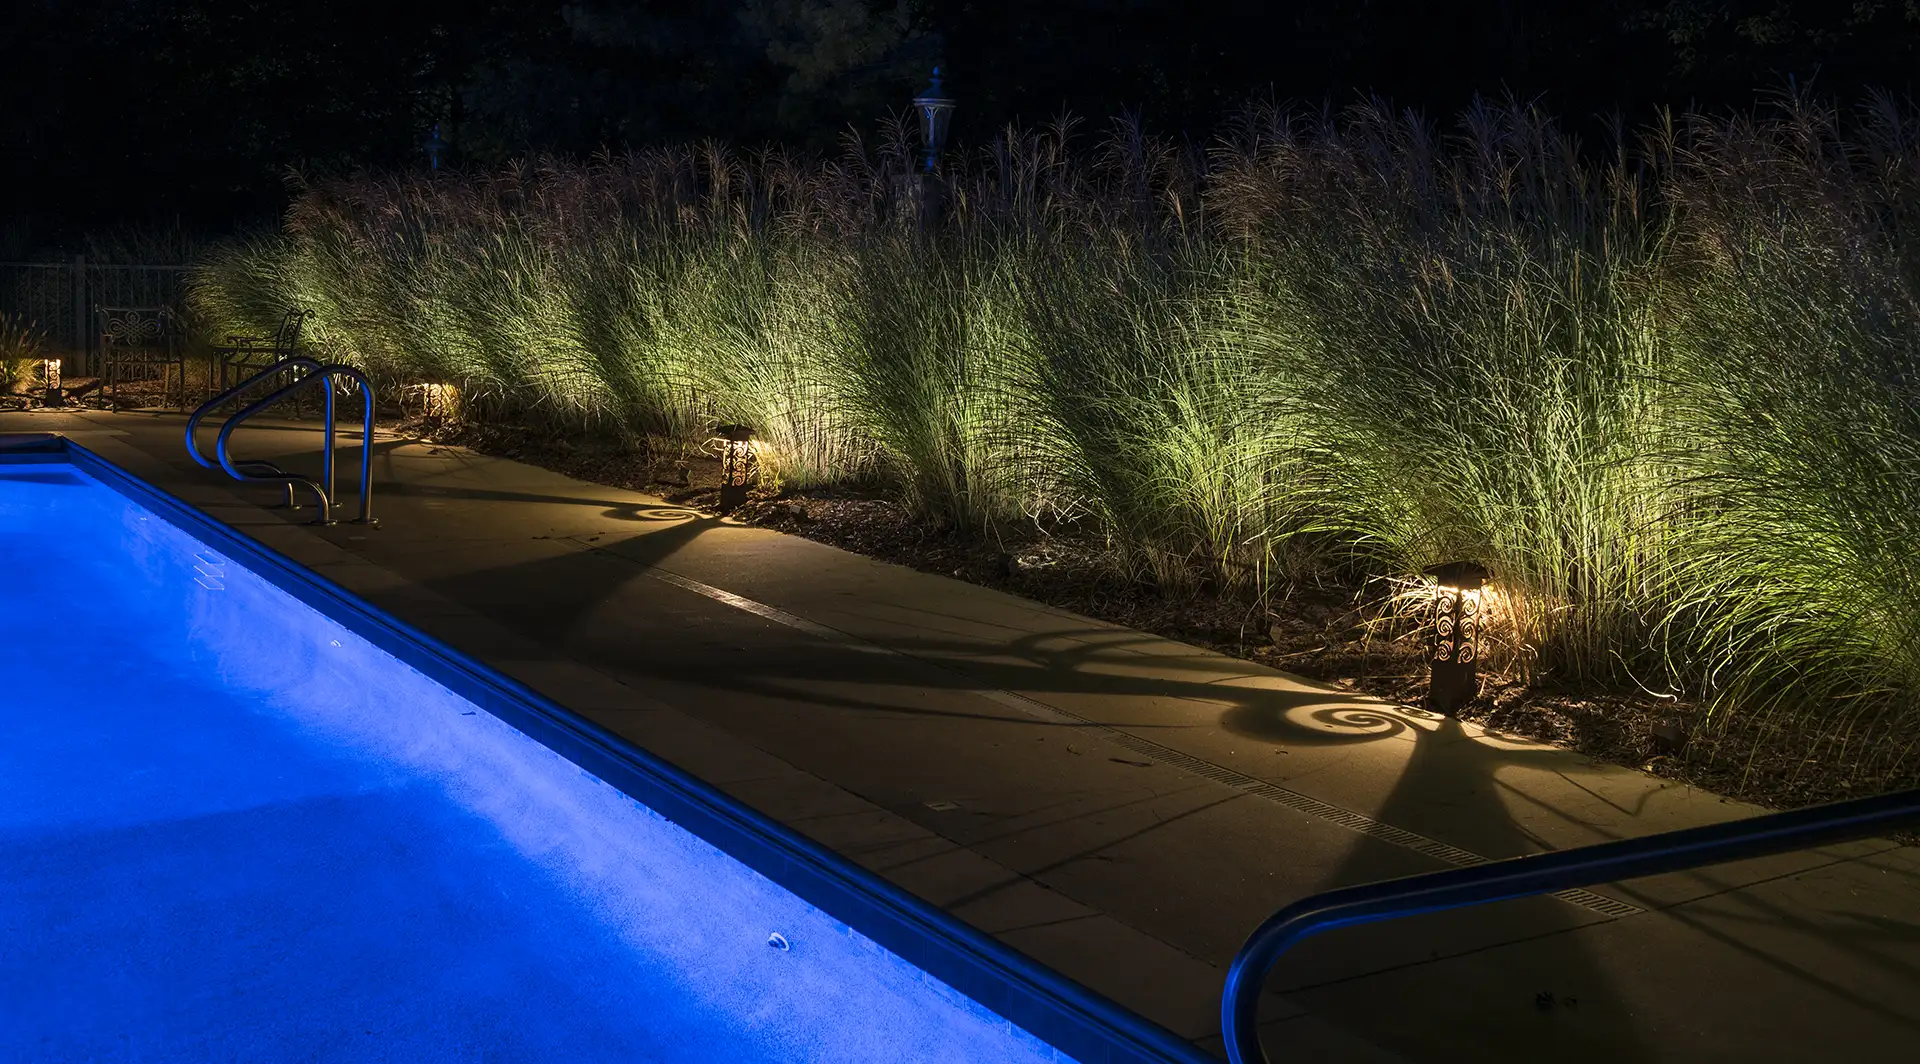 Schneider residence image 5 pool seating area bollard lights Lighthouse Outdoor Lighting and Audio central Missouri